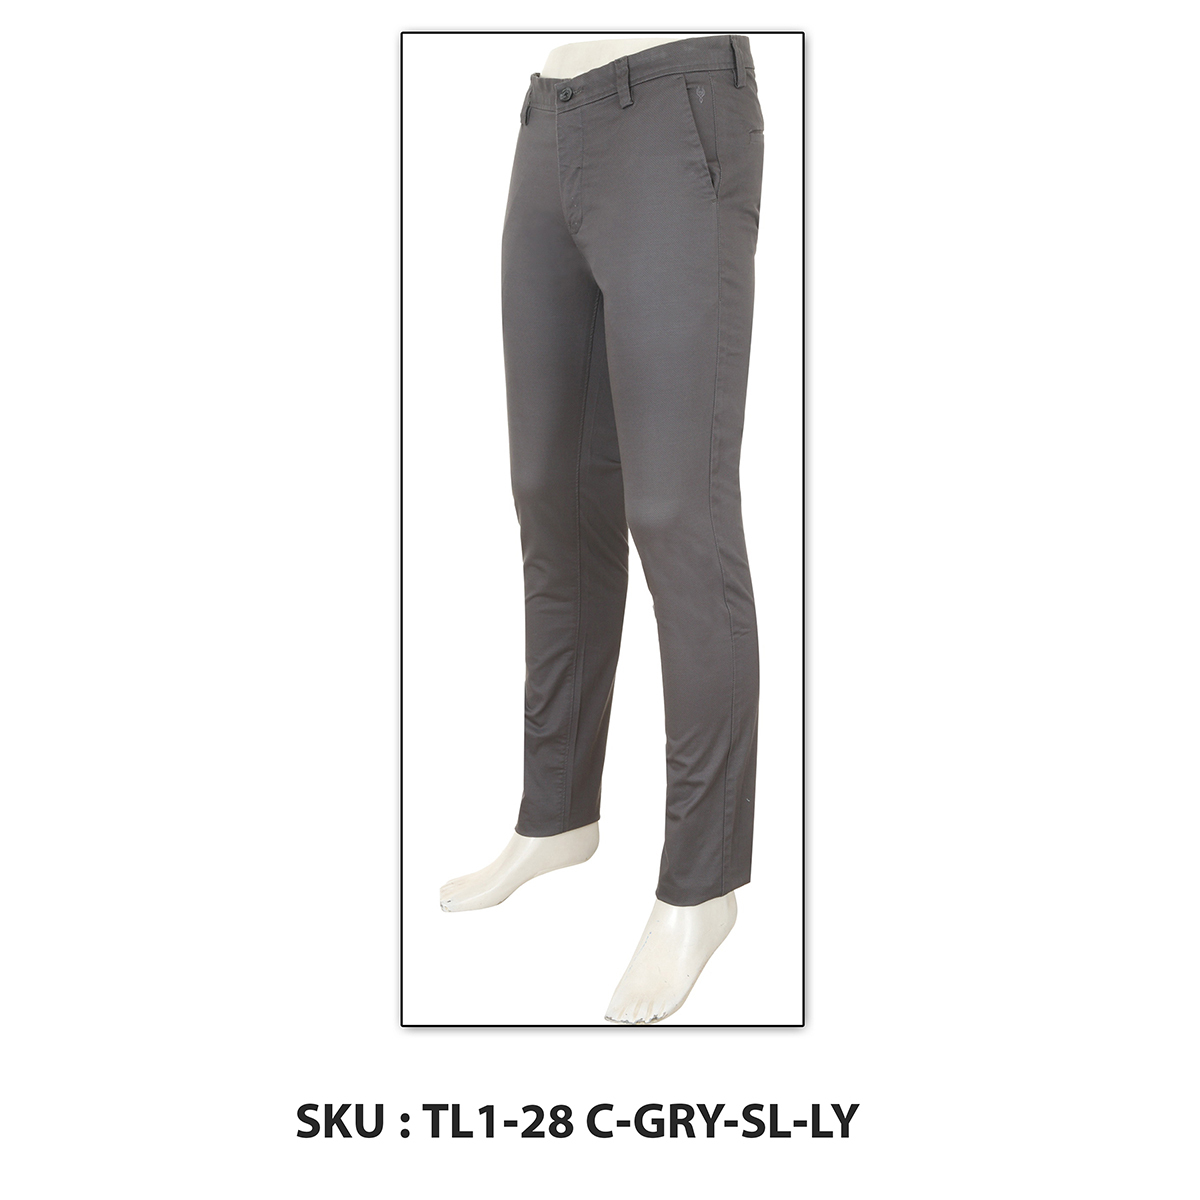 Classic Polo Mens Trousers Tl1-28 C-Gry-Sl-Ly Grey 38